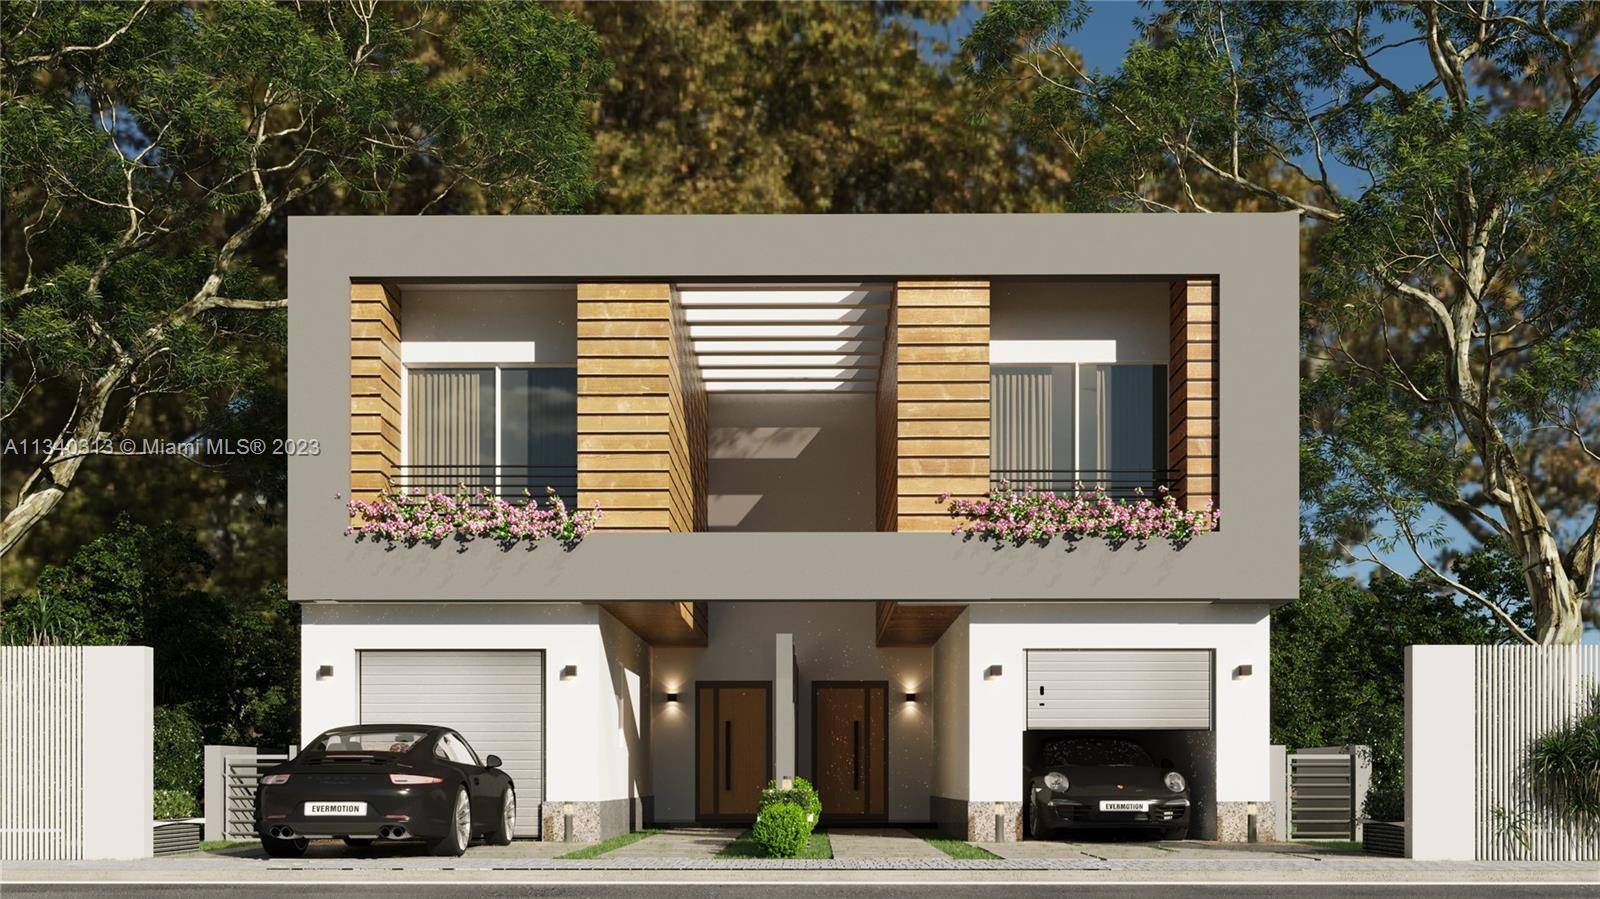 New Construction. Nestled upon The Roads this new urban villa offers the perfect balance of location, luxury, and space.